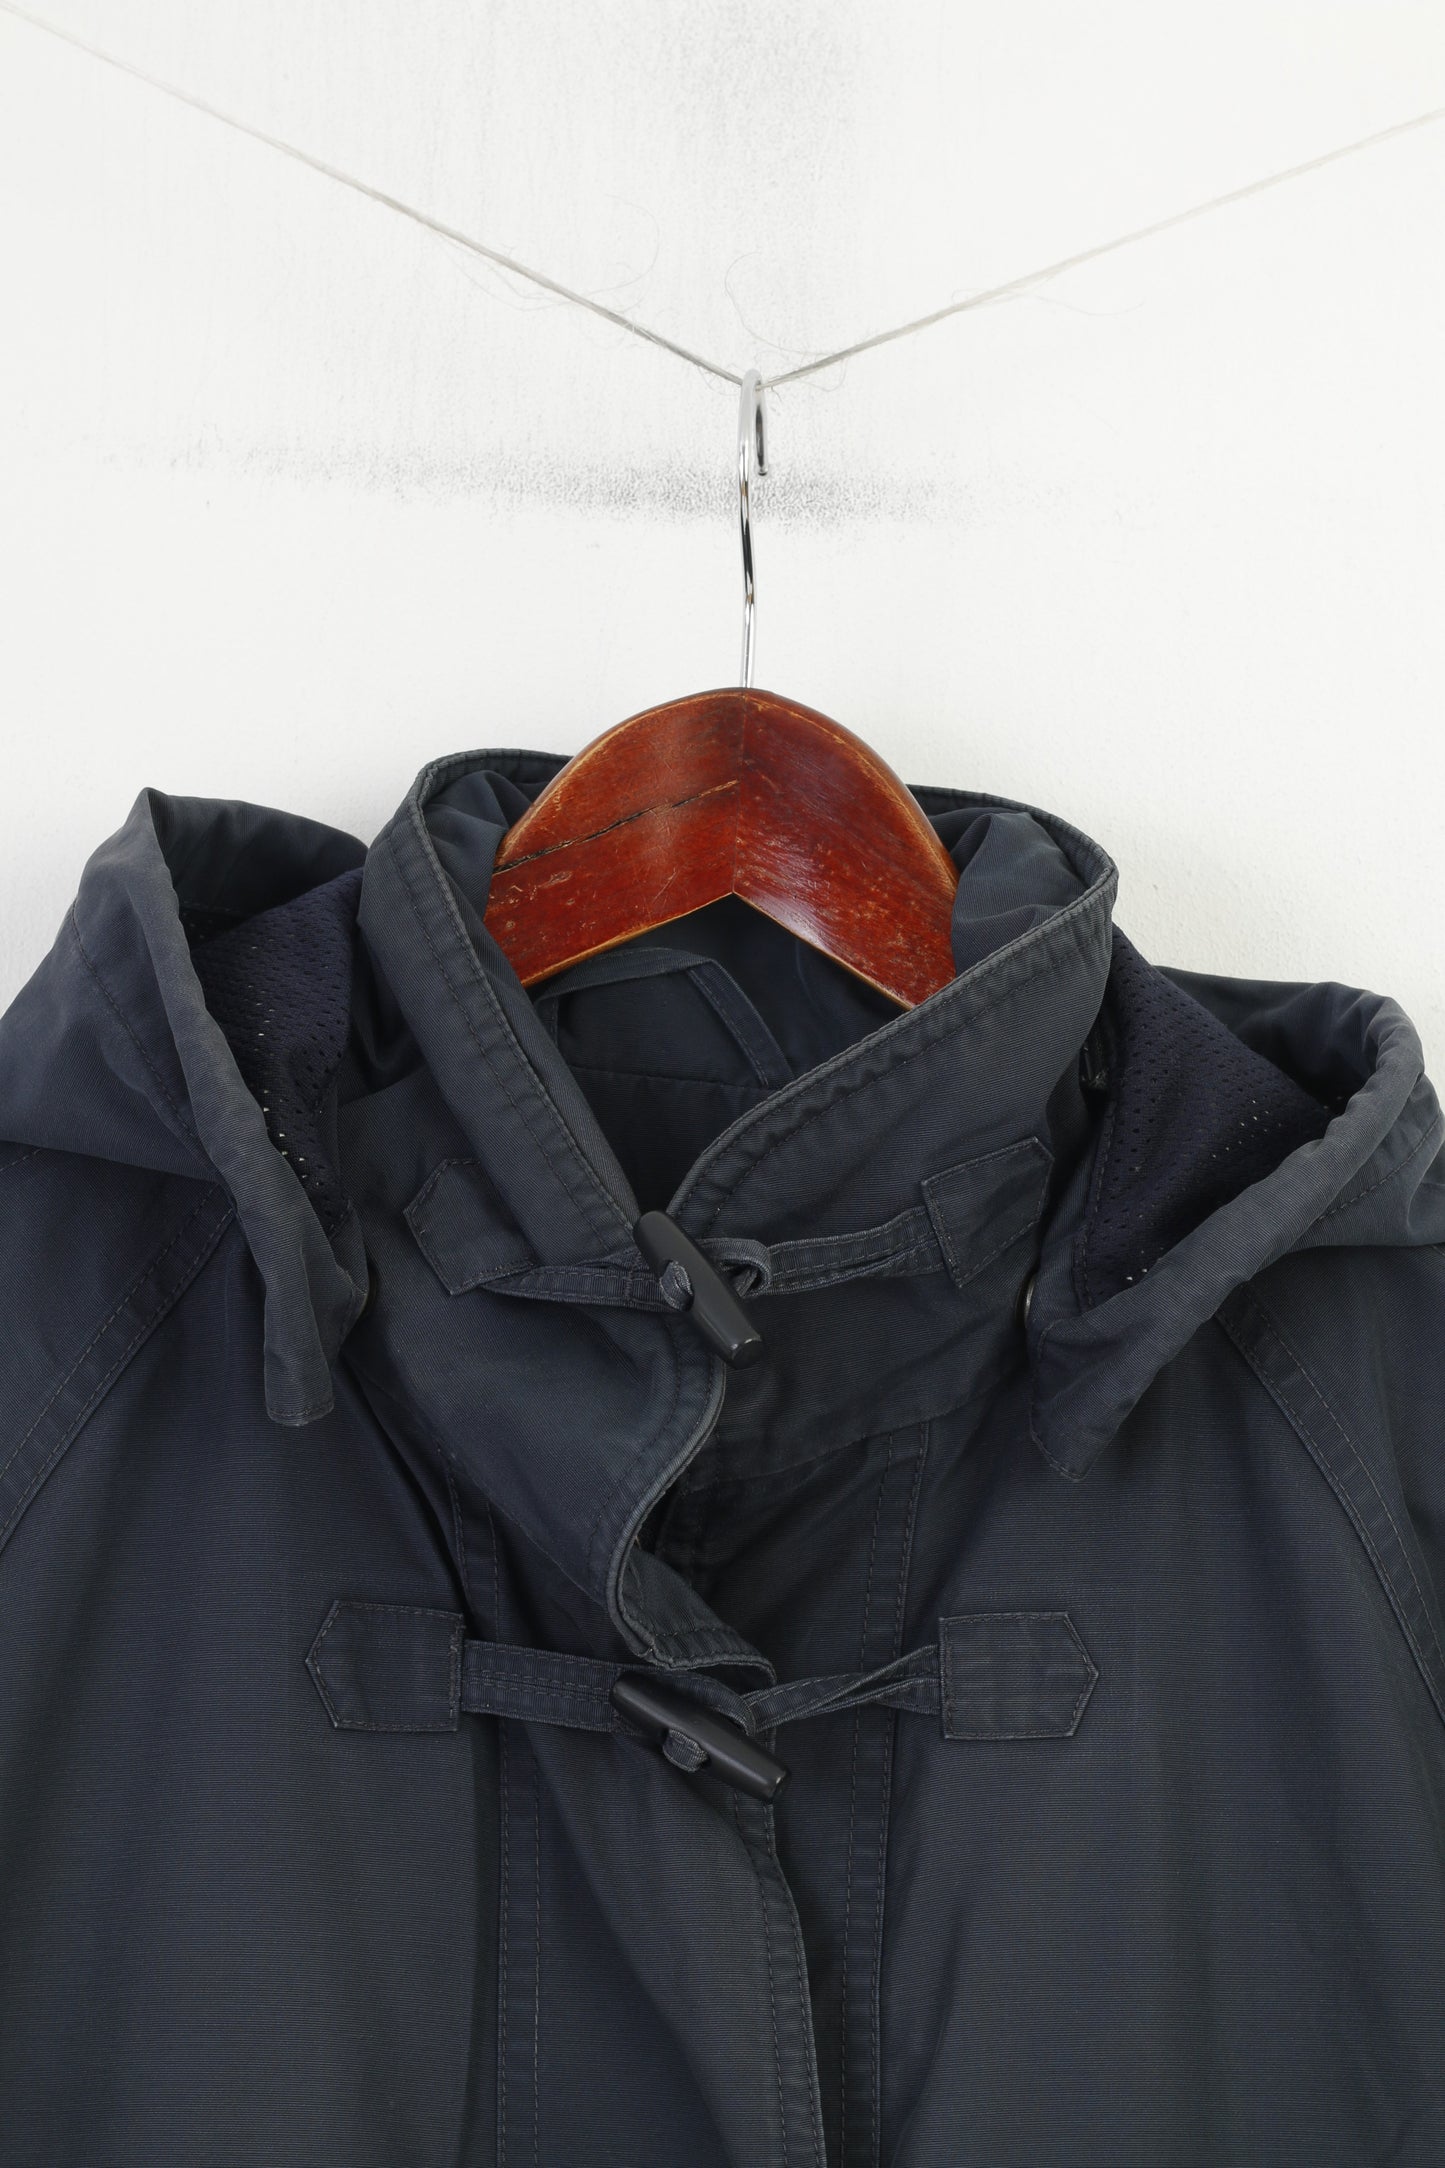 Red Green Men S Jacket Navy Cotton Nylon Blend Duffle Hooded Outdoor Vintage Pockets Top